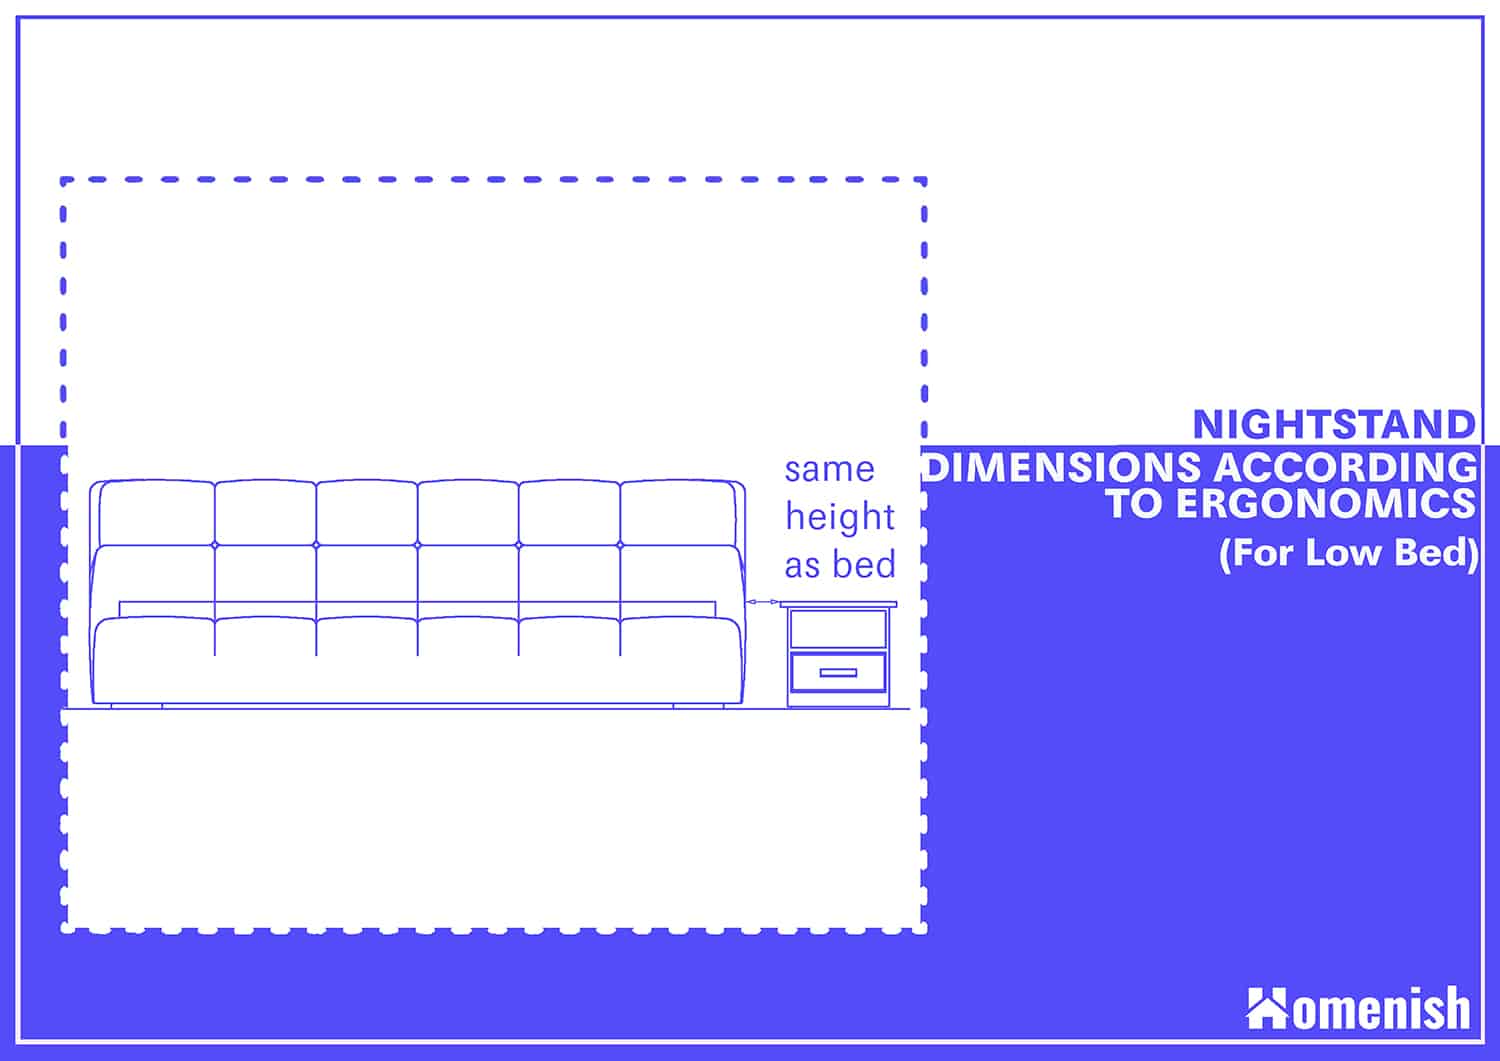 Nightstand dimensions according to ergonomics for low beds